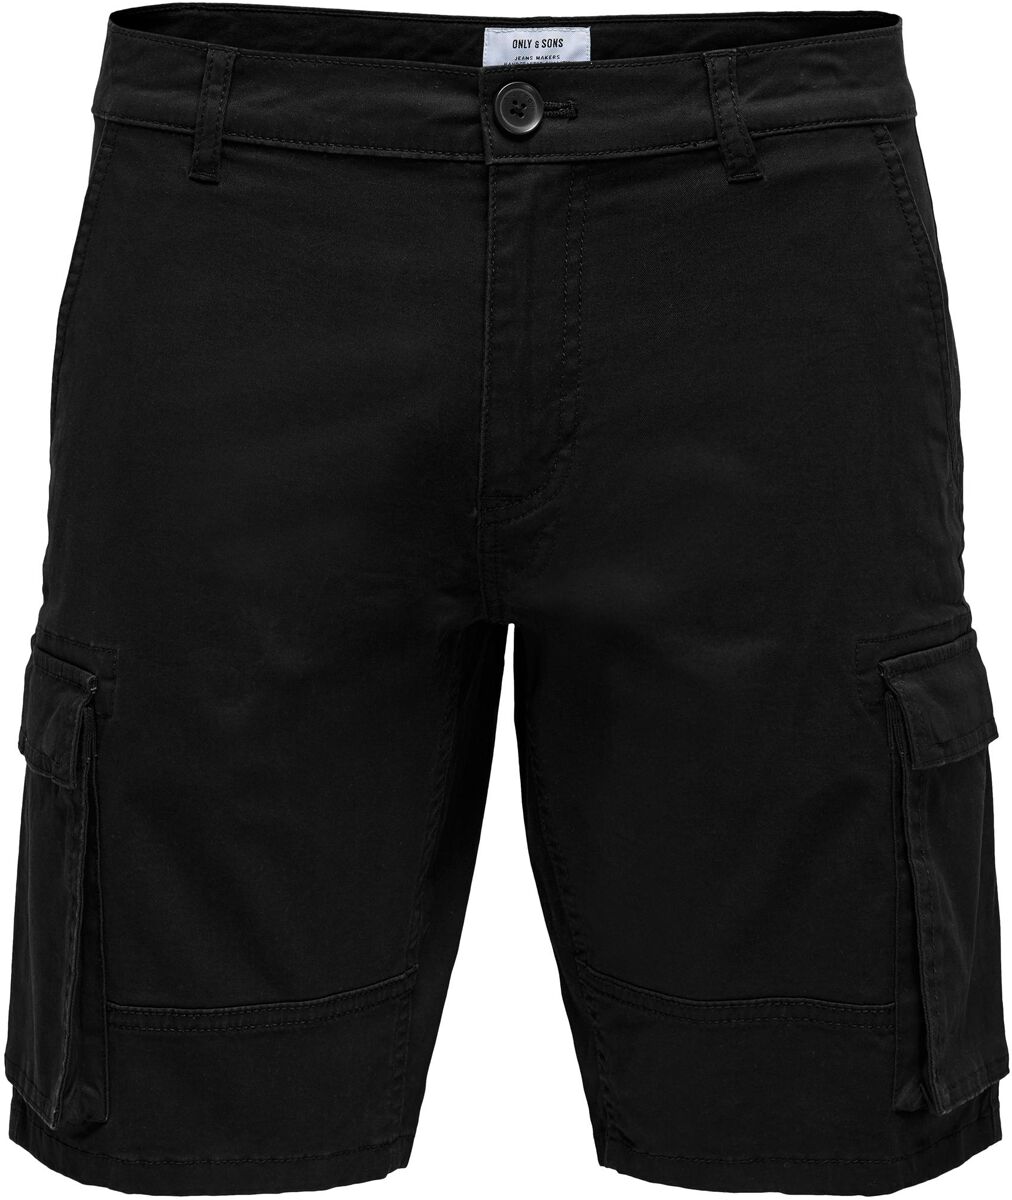 Image of Shorts di ONLY and SONS - ONSCam Stage Cargo Shorts PK 6689 - S a XXL - Uomo - nero